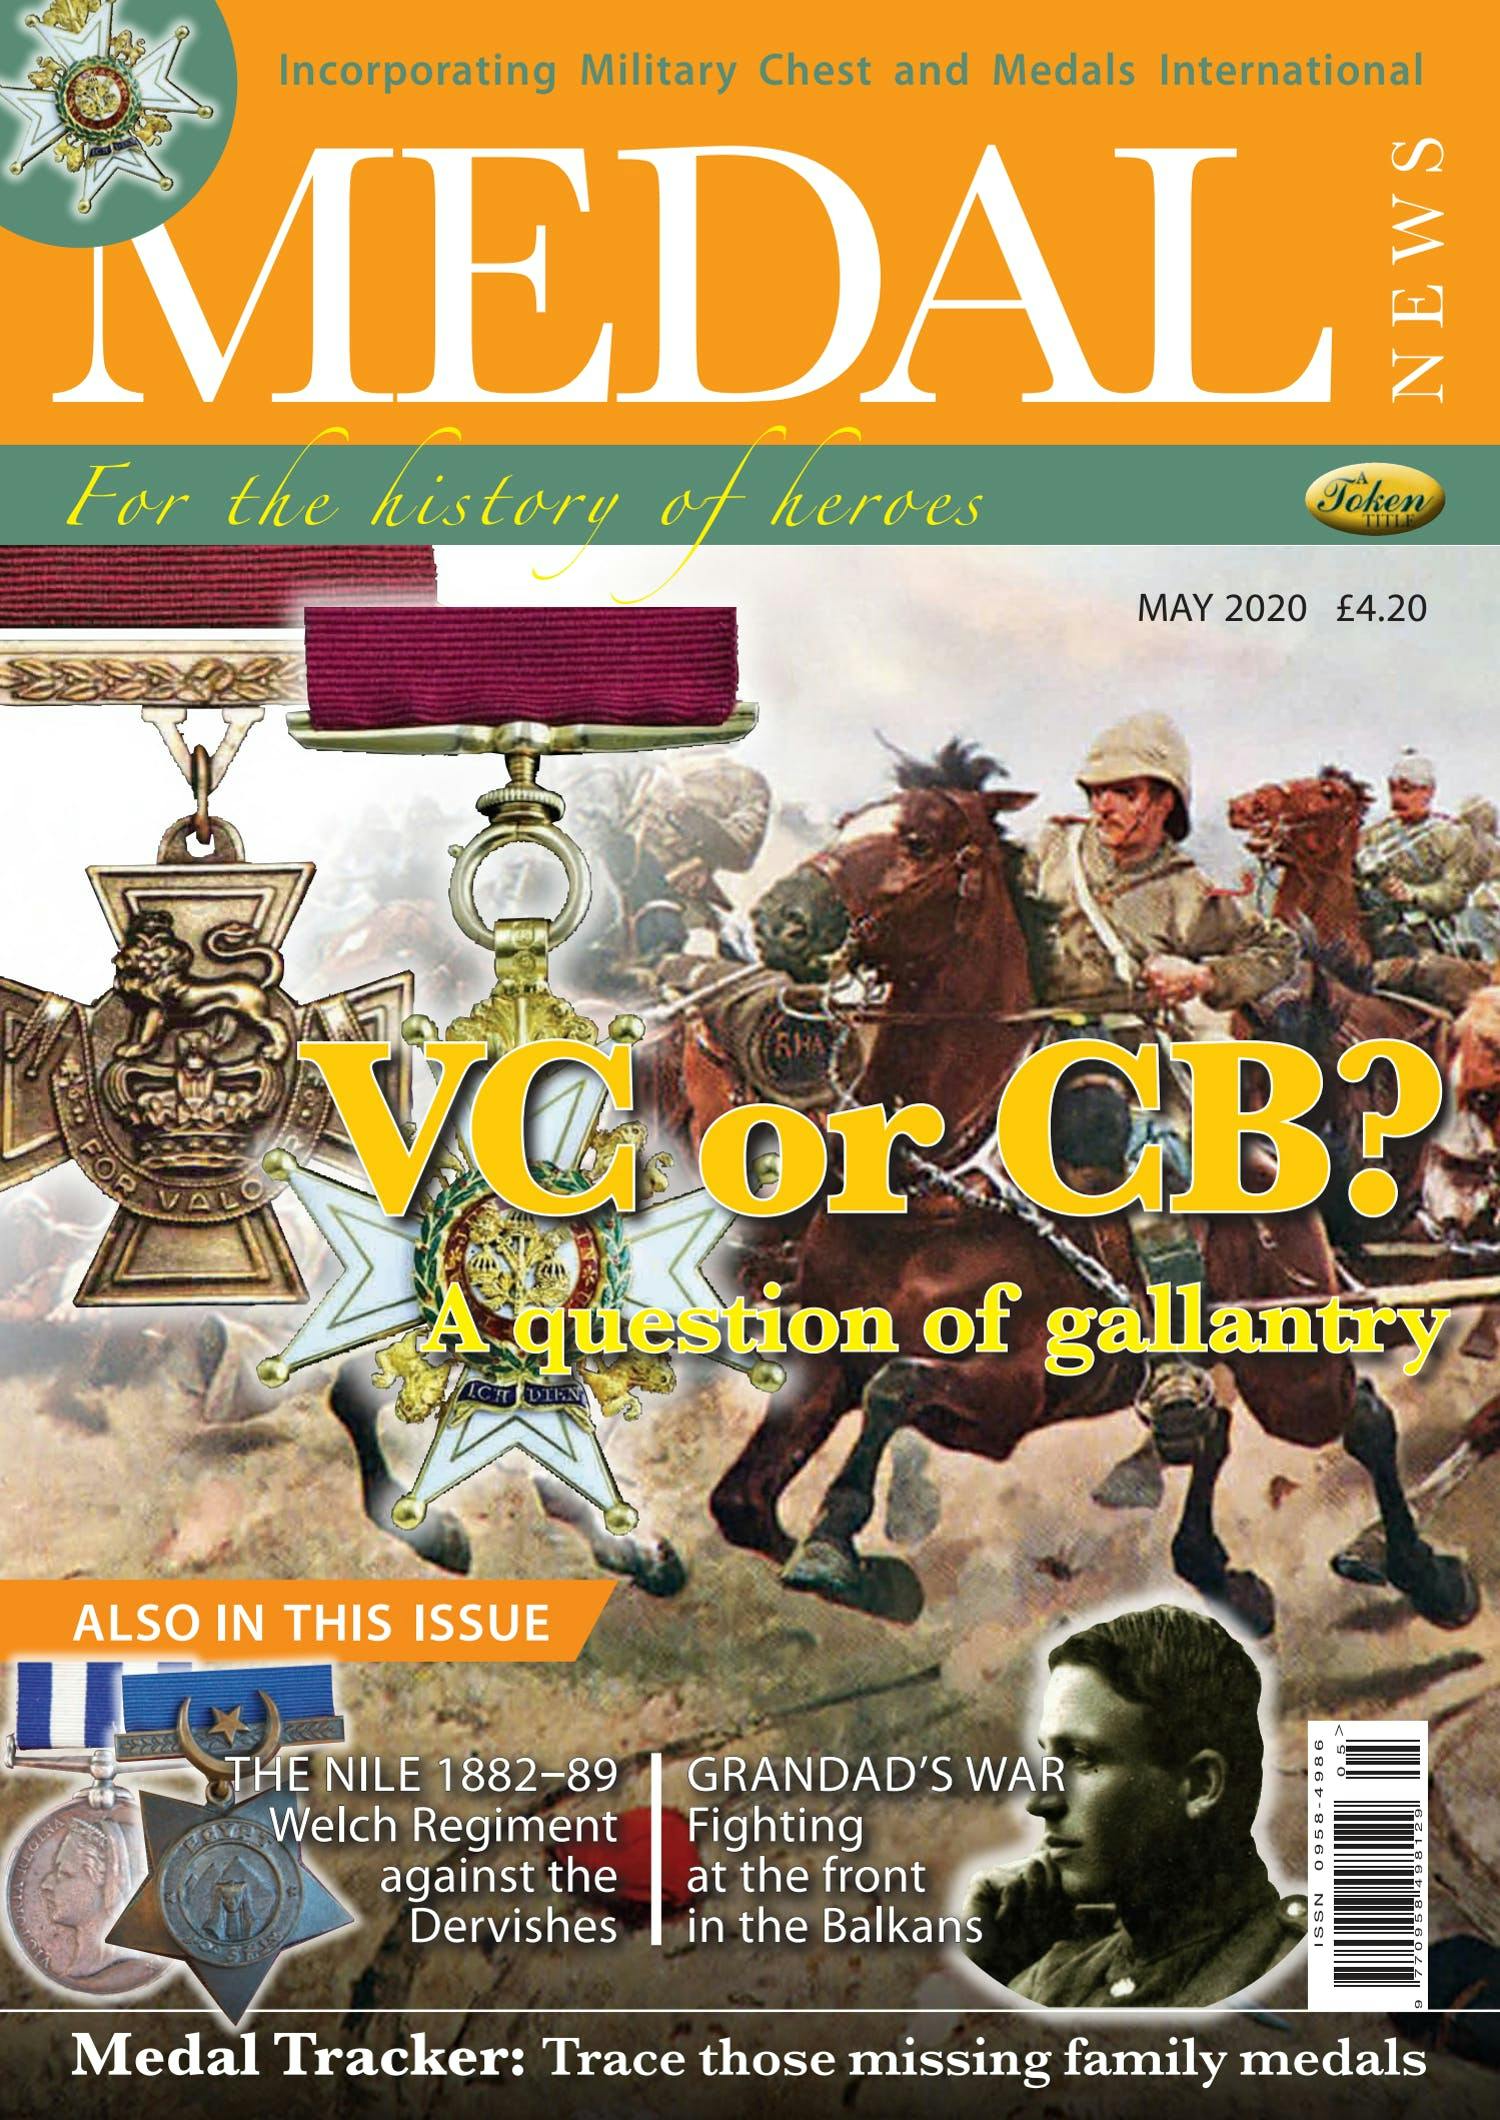 Front cover of 'VC or CB?', Medal News May 2020, Volume 58, Number 5 by Token Publishing